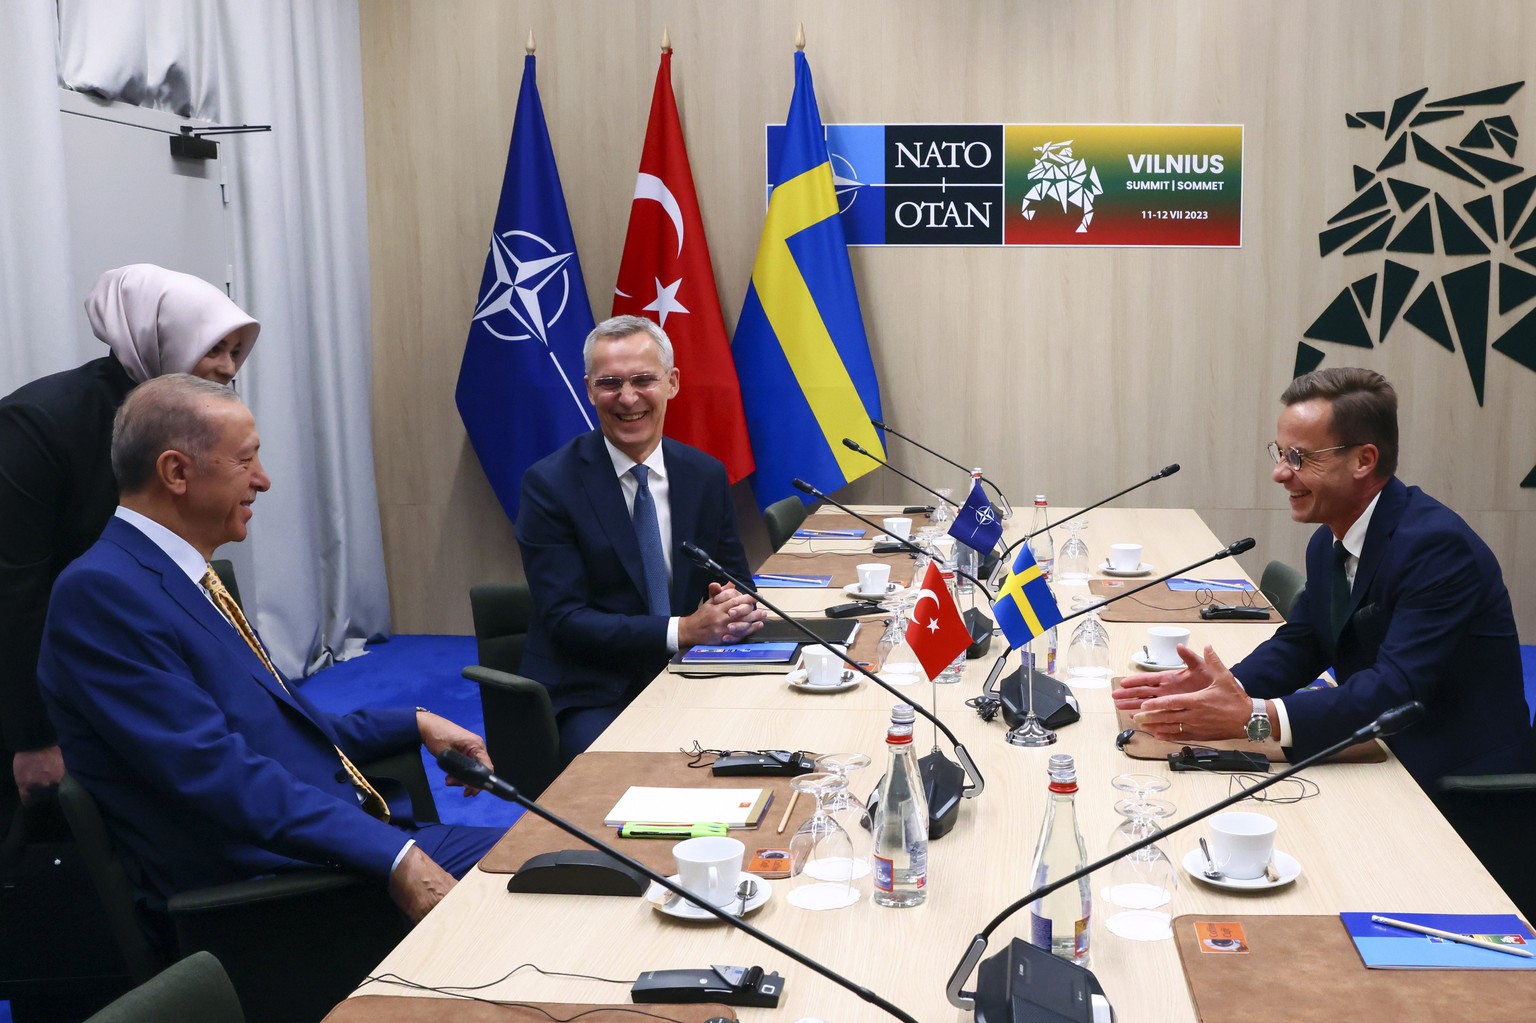 epa10738082 NATO Secretary-General Jens Stoltenberg (C), Turkish President Tayyip Erdogan (L) and Swedish Prime Minister Ulf Kristersson (R) react during a meeting, on the eve of a NATO summit, in Vil ...